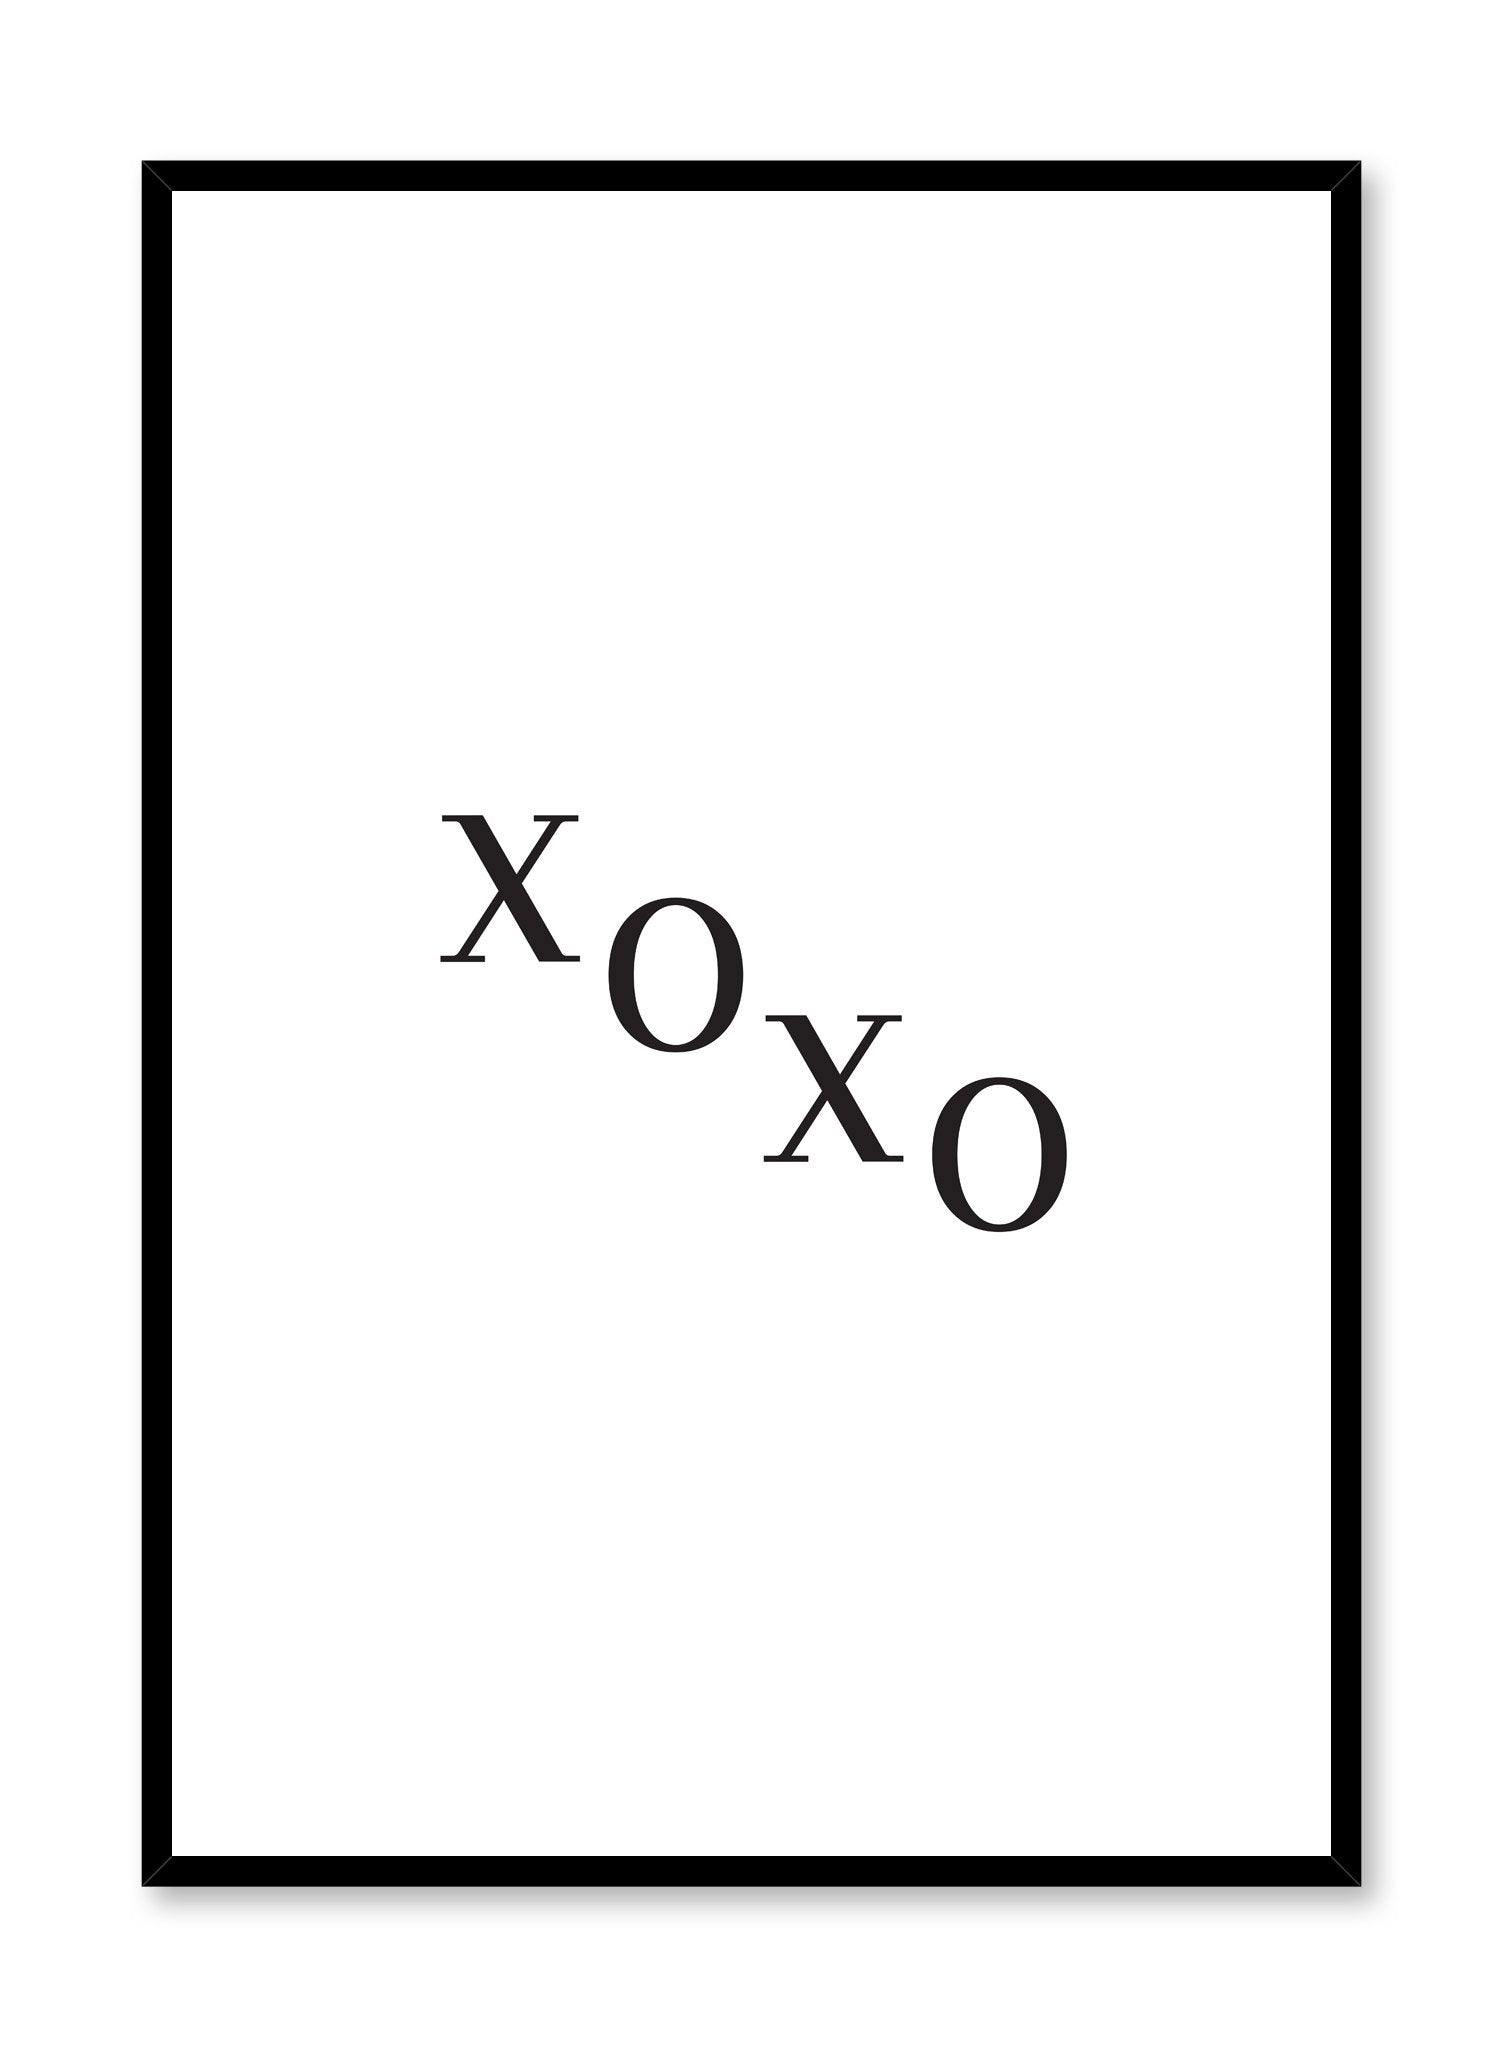 Scandinavian poster with black and white graphic typography design of XOXO text by Opposite Wall